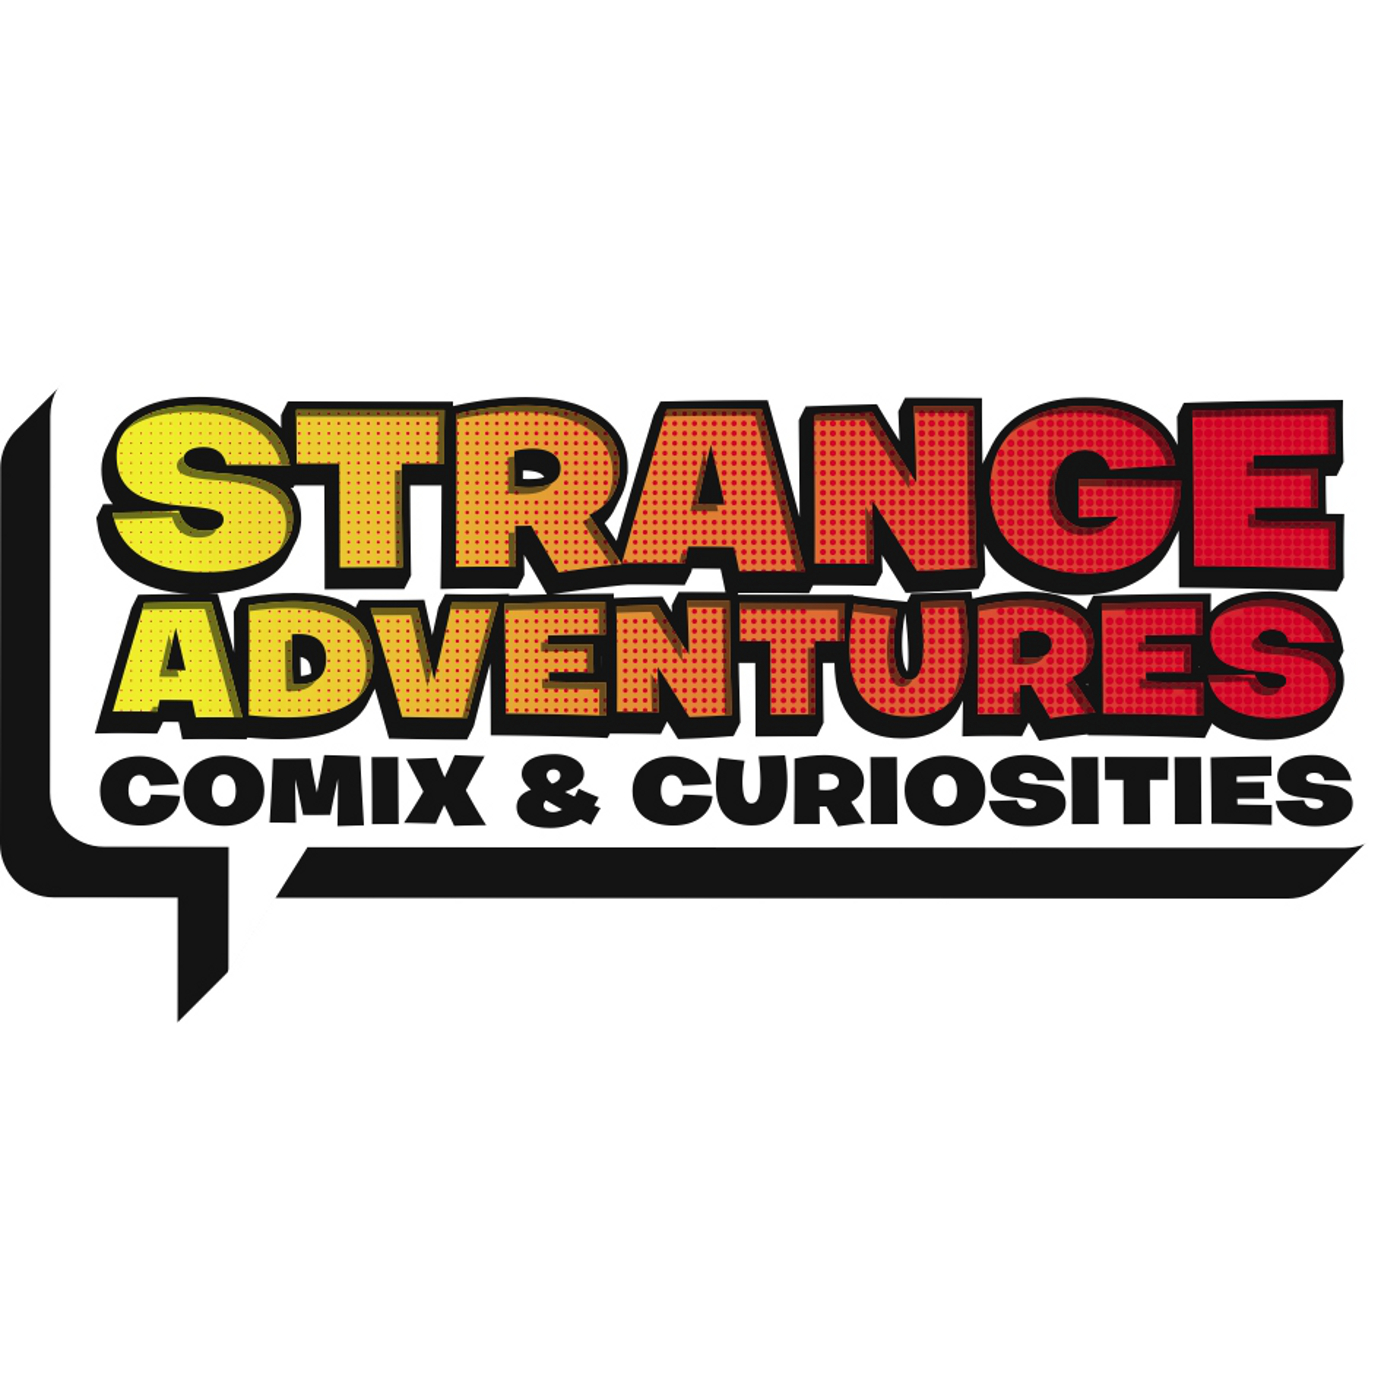  Canada's oddest and award-winning comic book stores.<BR> 20% off board games & statues